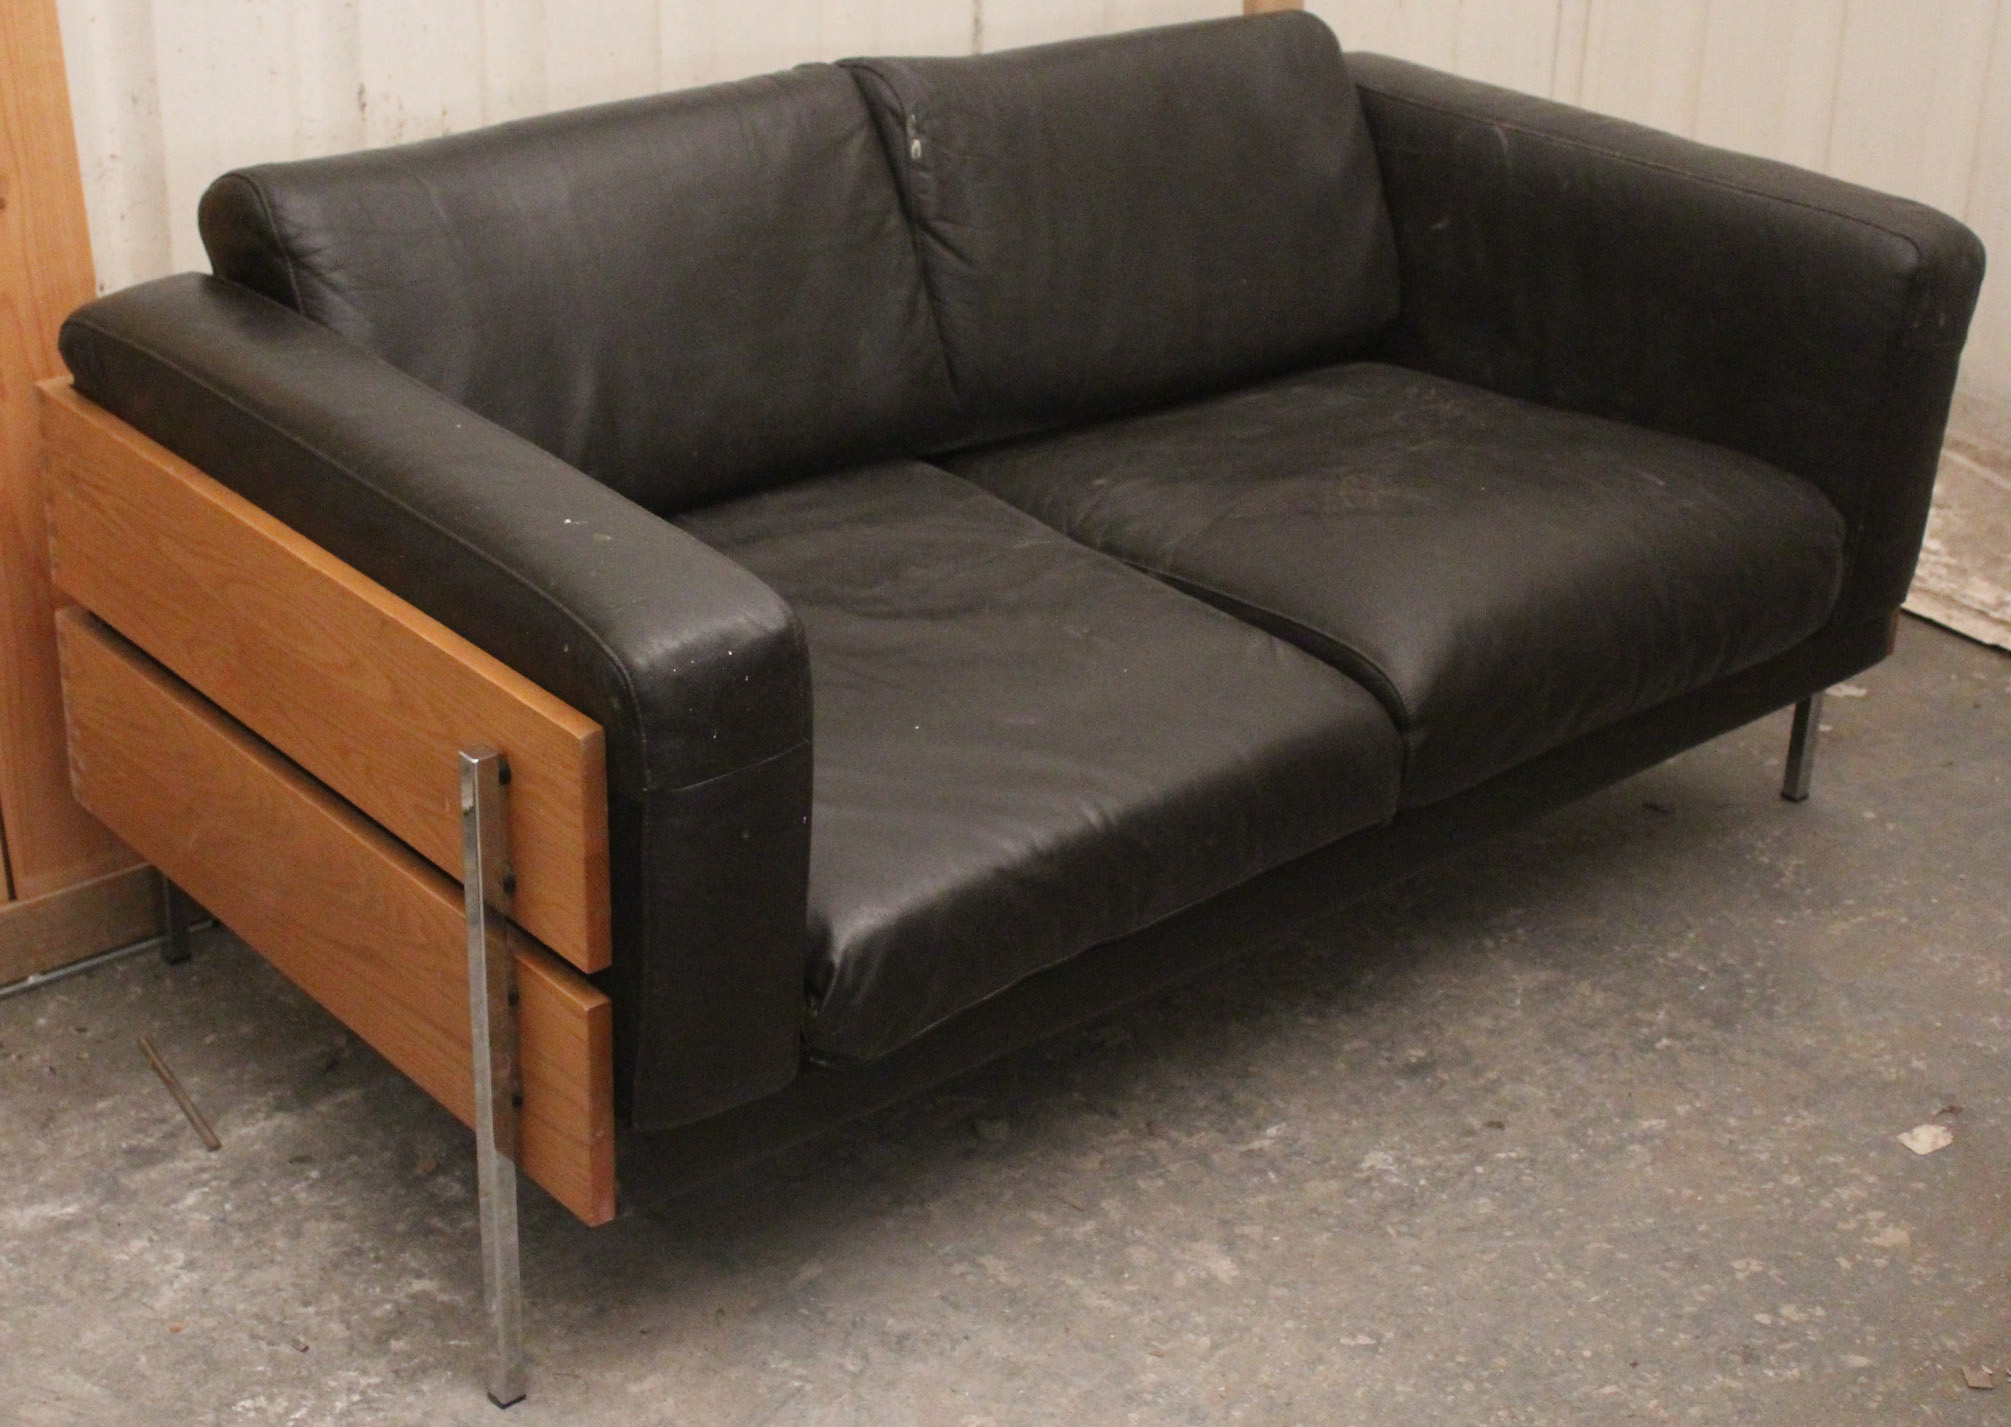 A Habitat brown leatherette & pine frame two-seater settee after a design by Robin Day, 59” long. - Image 2 of 2